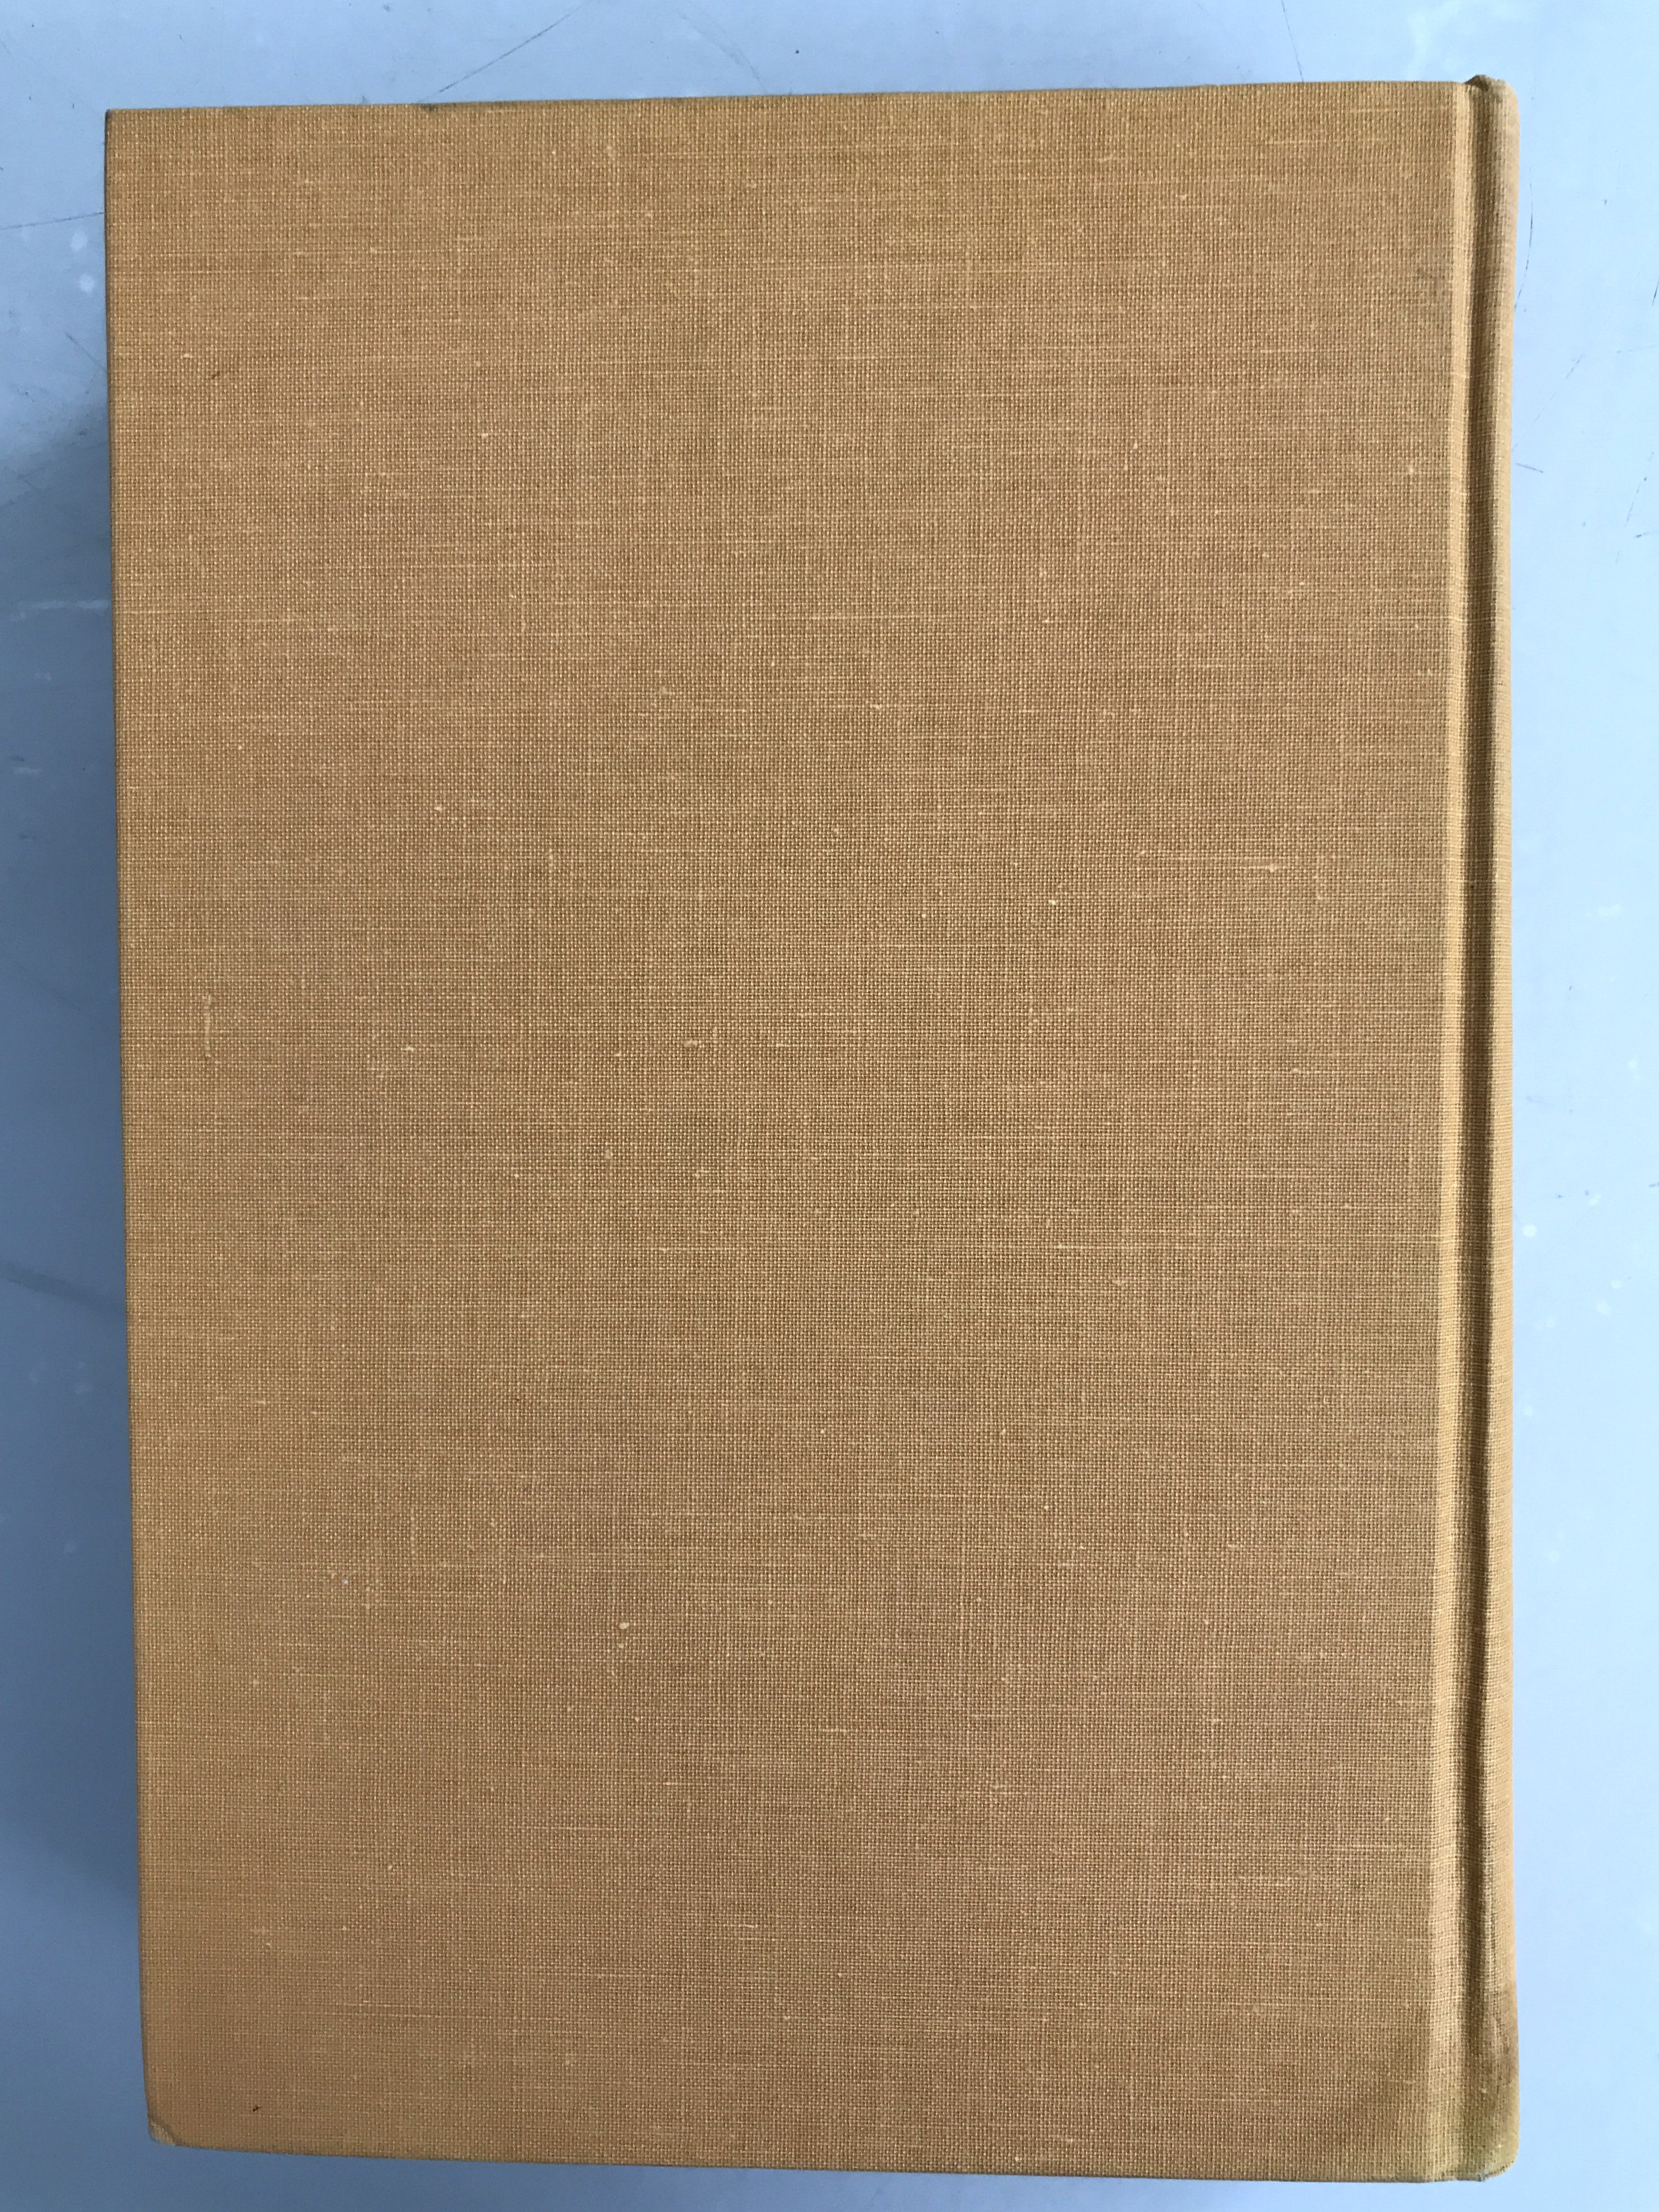 Personality and Social Systems by Neil and William Smelser 1963 HC DJ